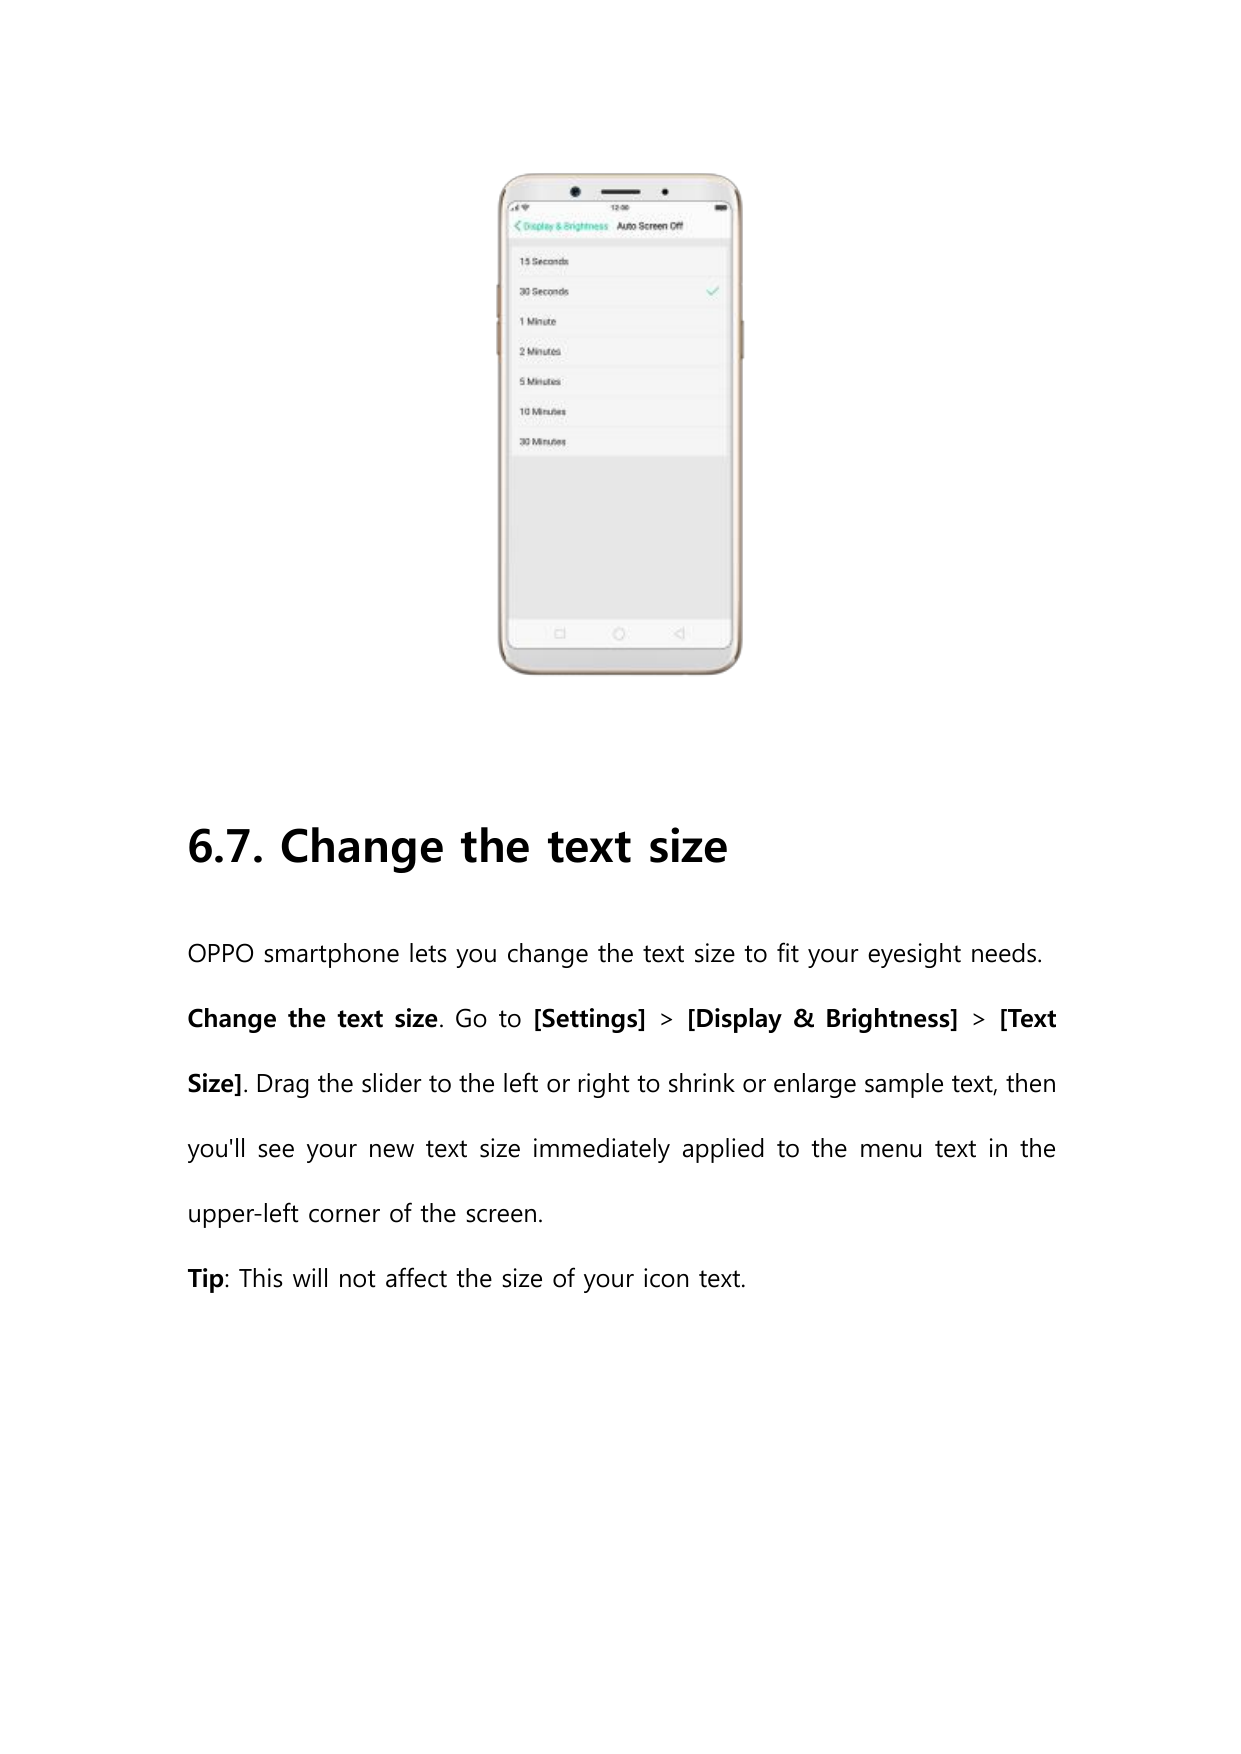 6.7. Change the text sizeOPPO smartphone lets you change the text size to fit your eyesight needs.Change the text size. Go to [S